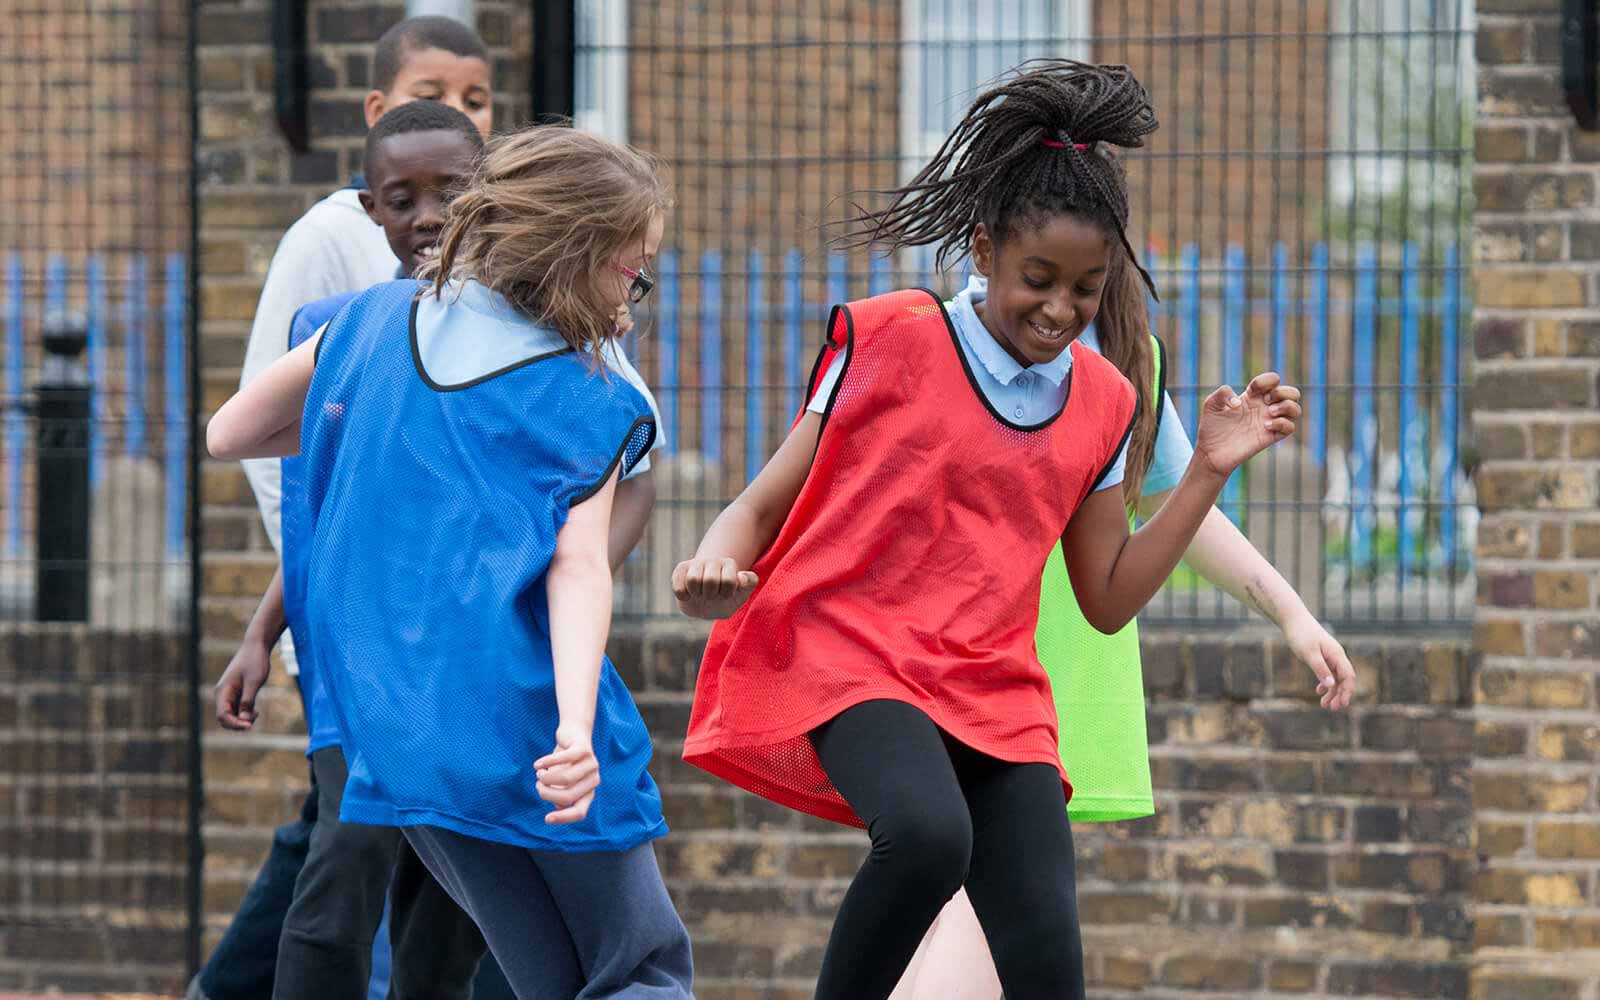 How to create an inclusive environment that works for everyone in PE